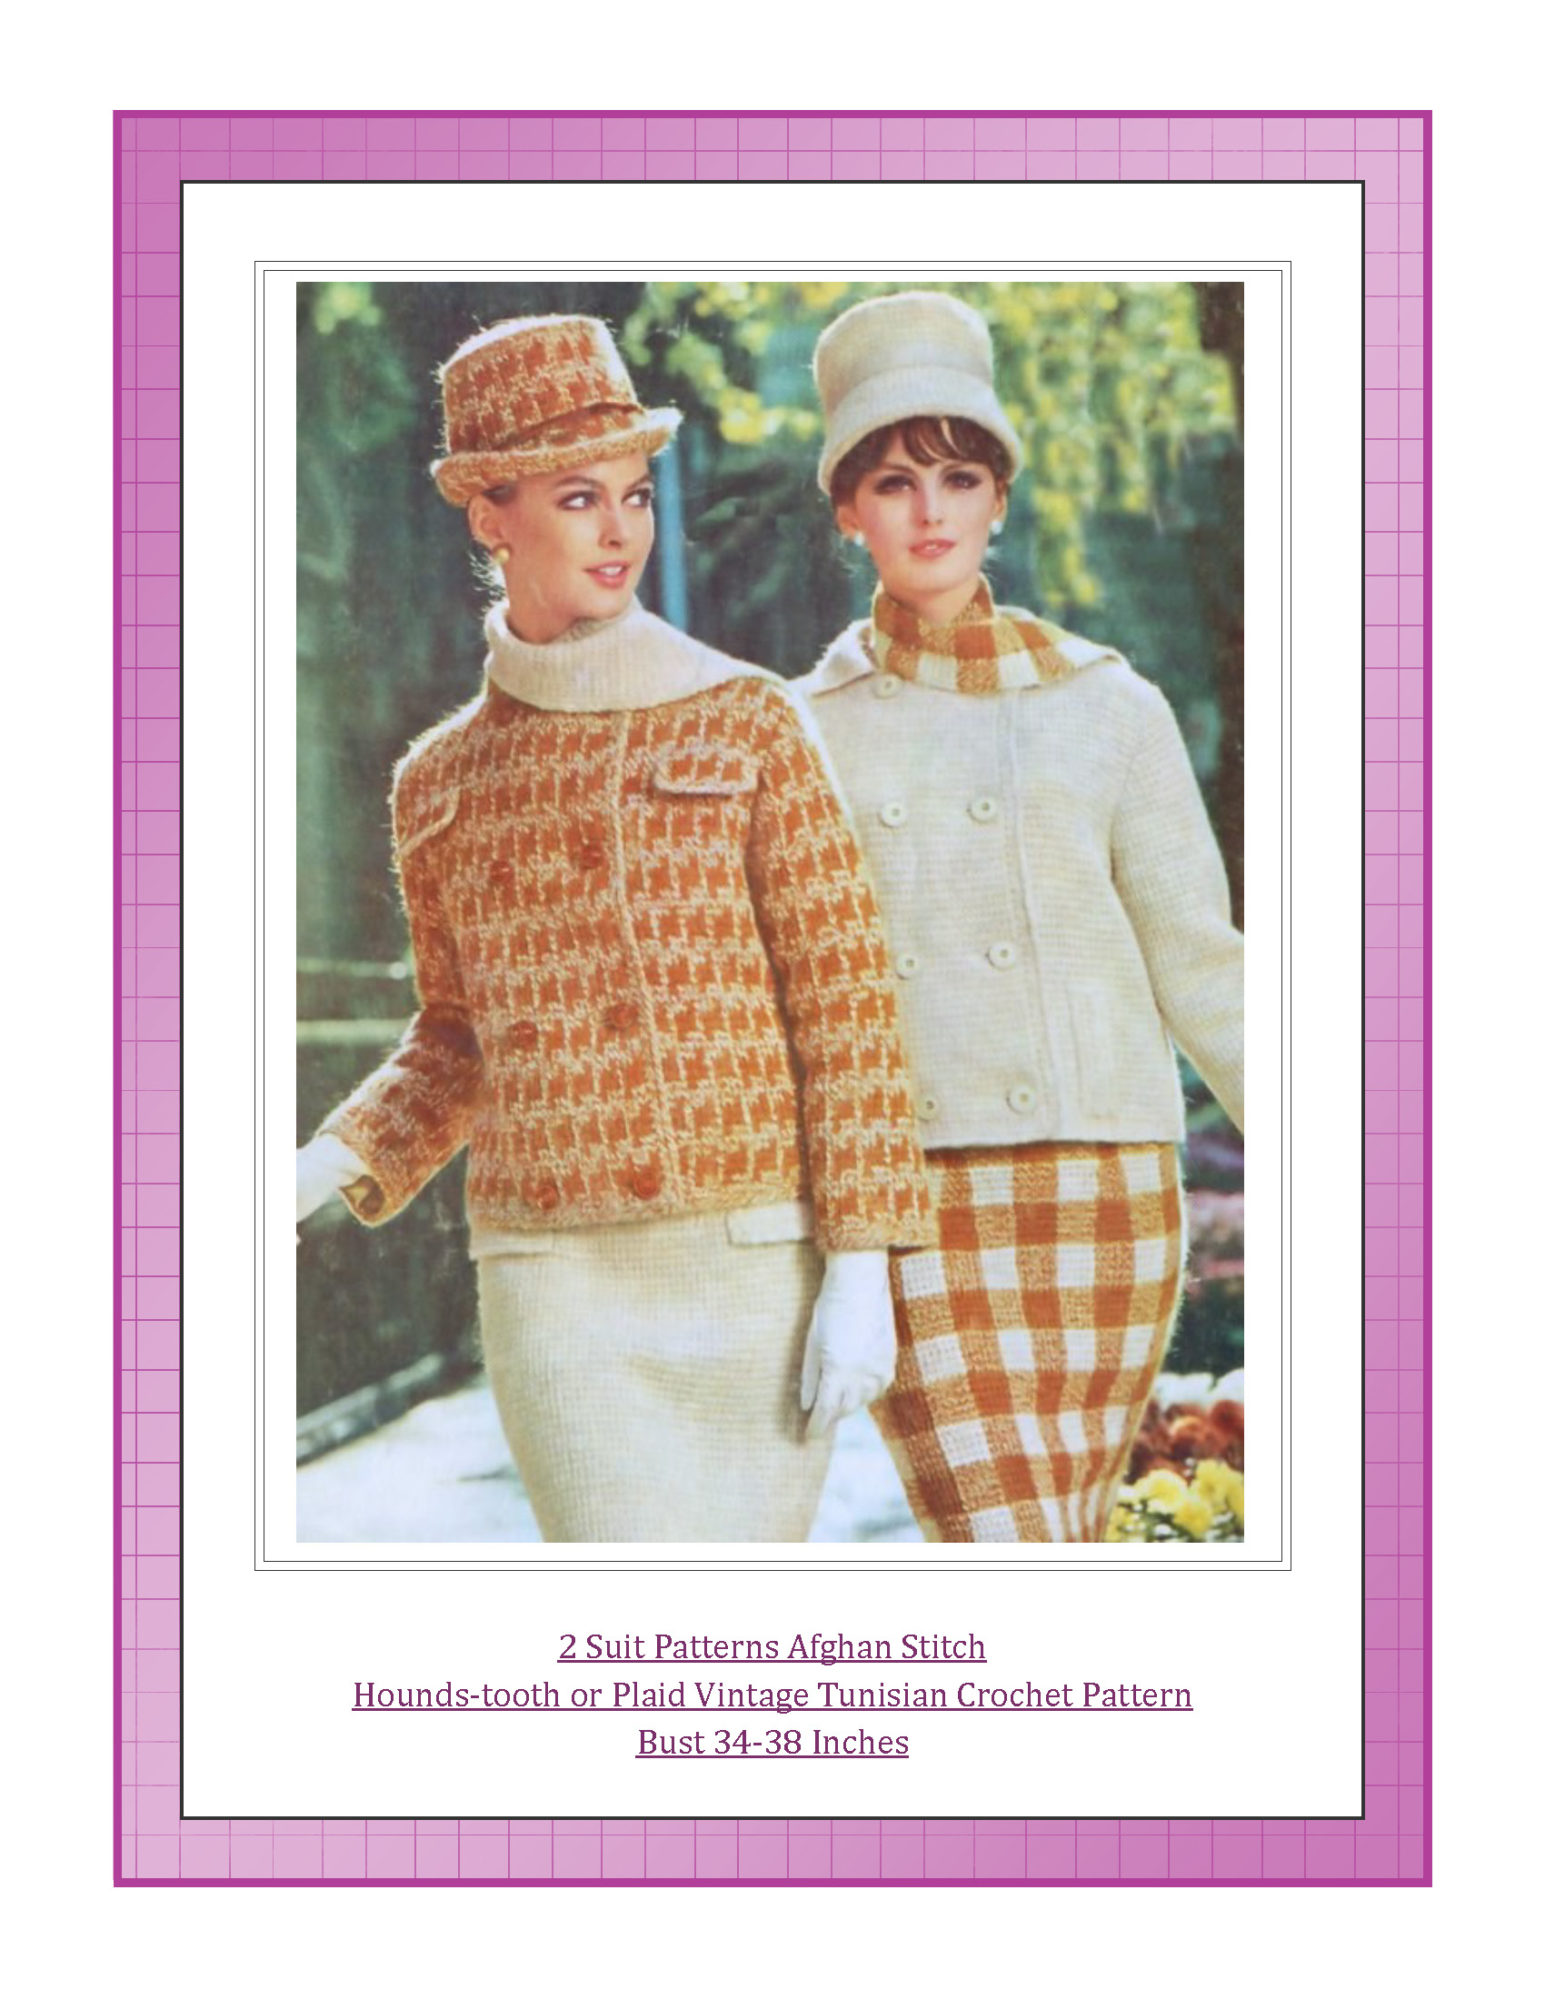 2 Suit Patterns Afghan Stitch Hounds-tooth or Plaid Vintage Tunisian Crochet Pattern Bust 34-38 Inches